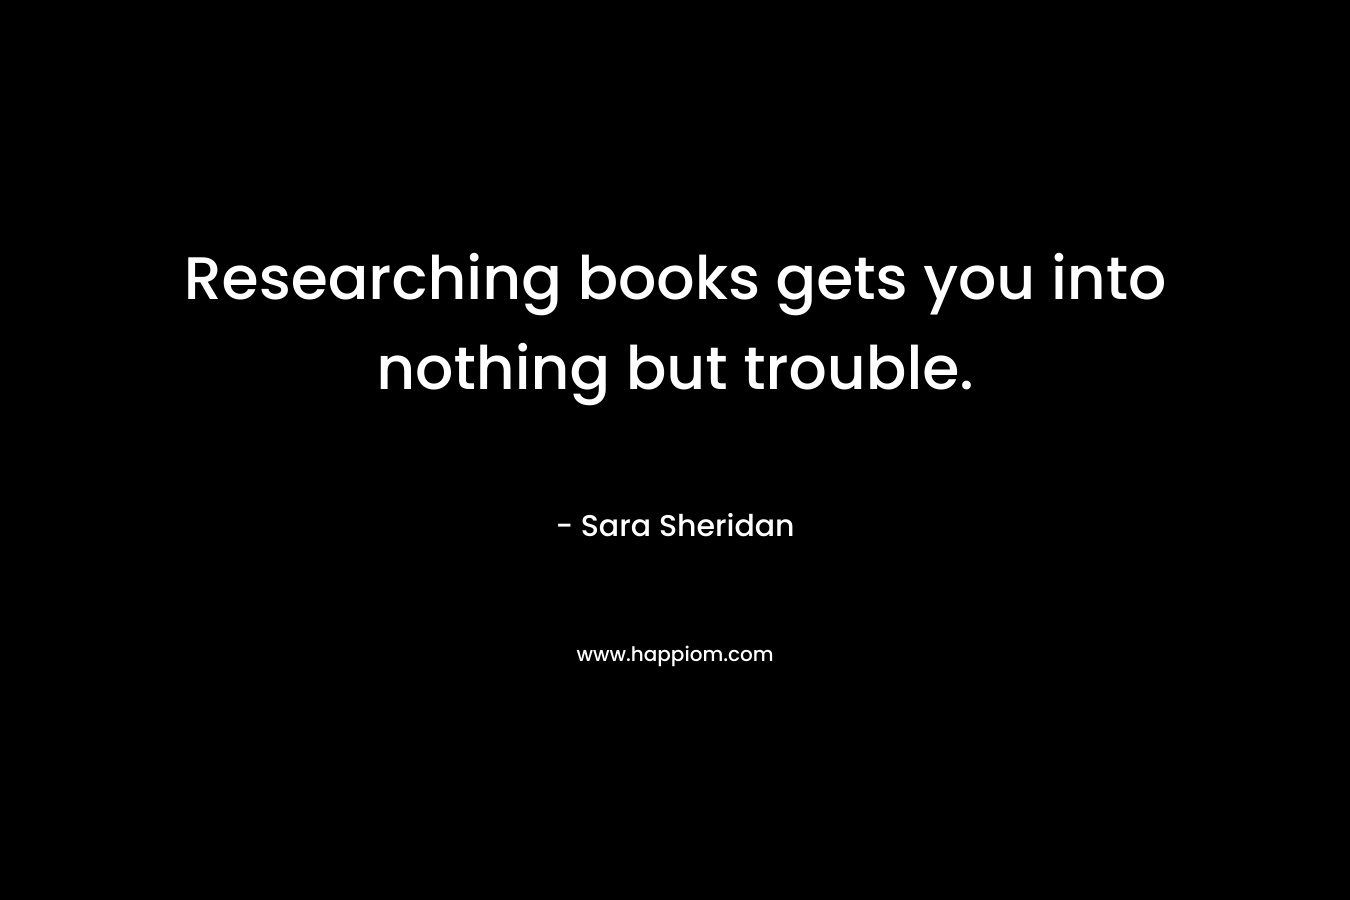 Researching books gets you into nothing but trouble.